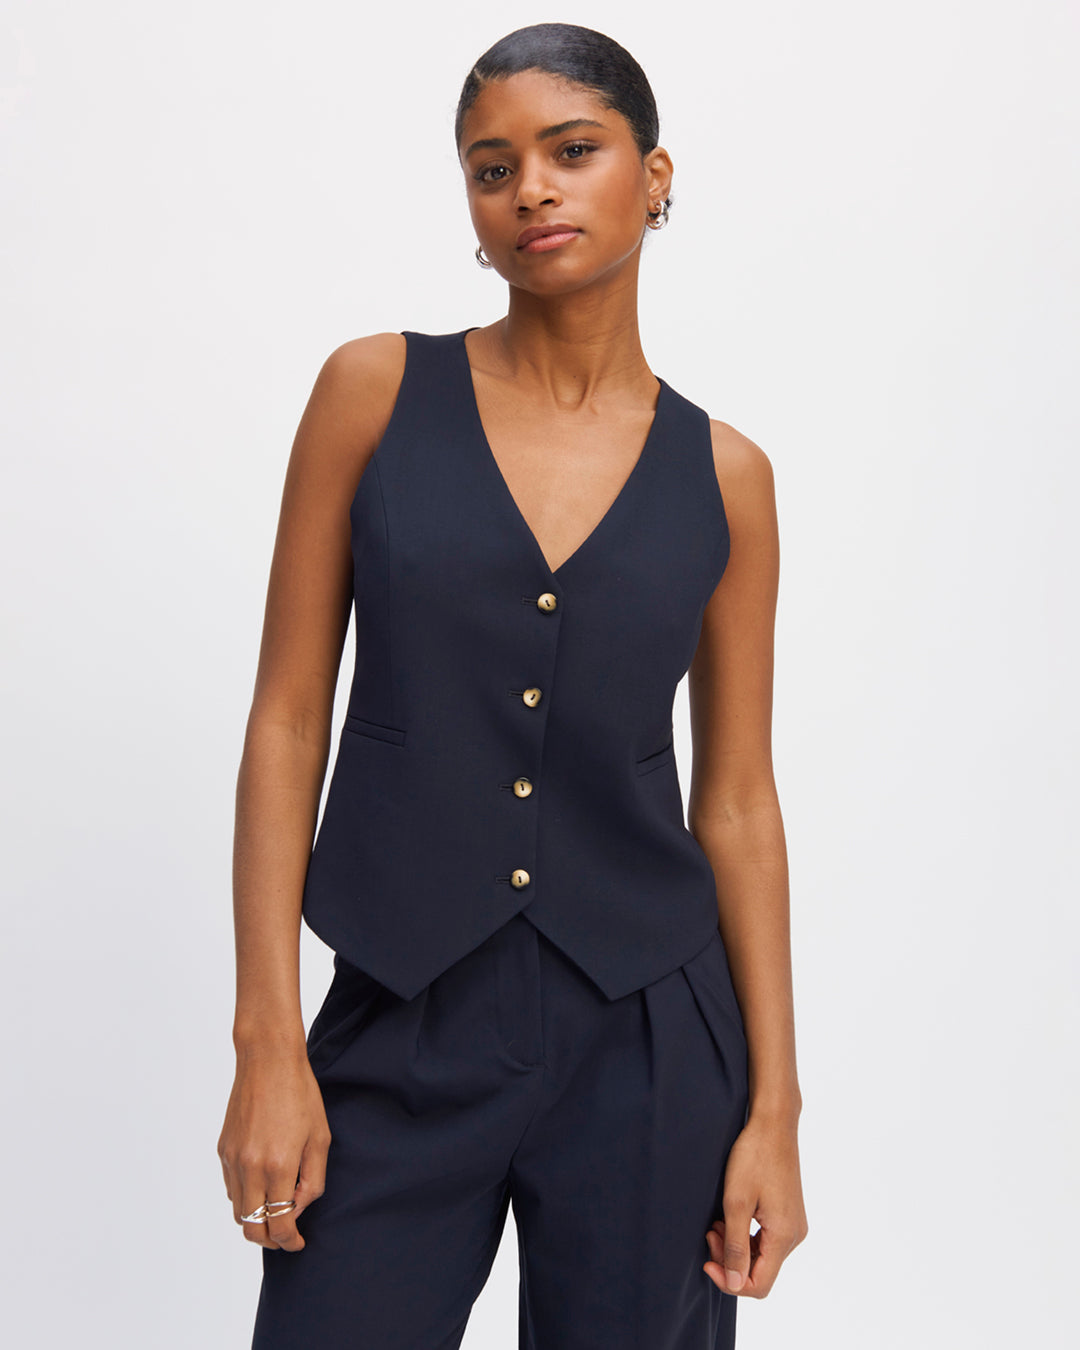 Waistcoat-navy-blue-without-sleeve-Collar-in-V-Four-buttons-camel-Fastening-simple-buttoning-Door-open-or-closed-Pockets-Paspoilées-17H10-tailleurs-pour-femme-paris-